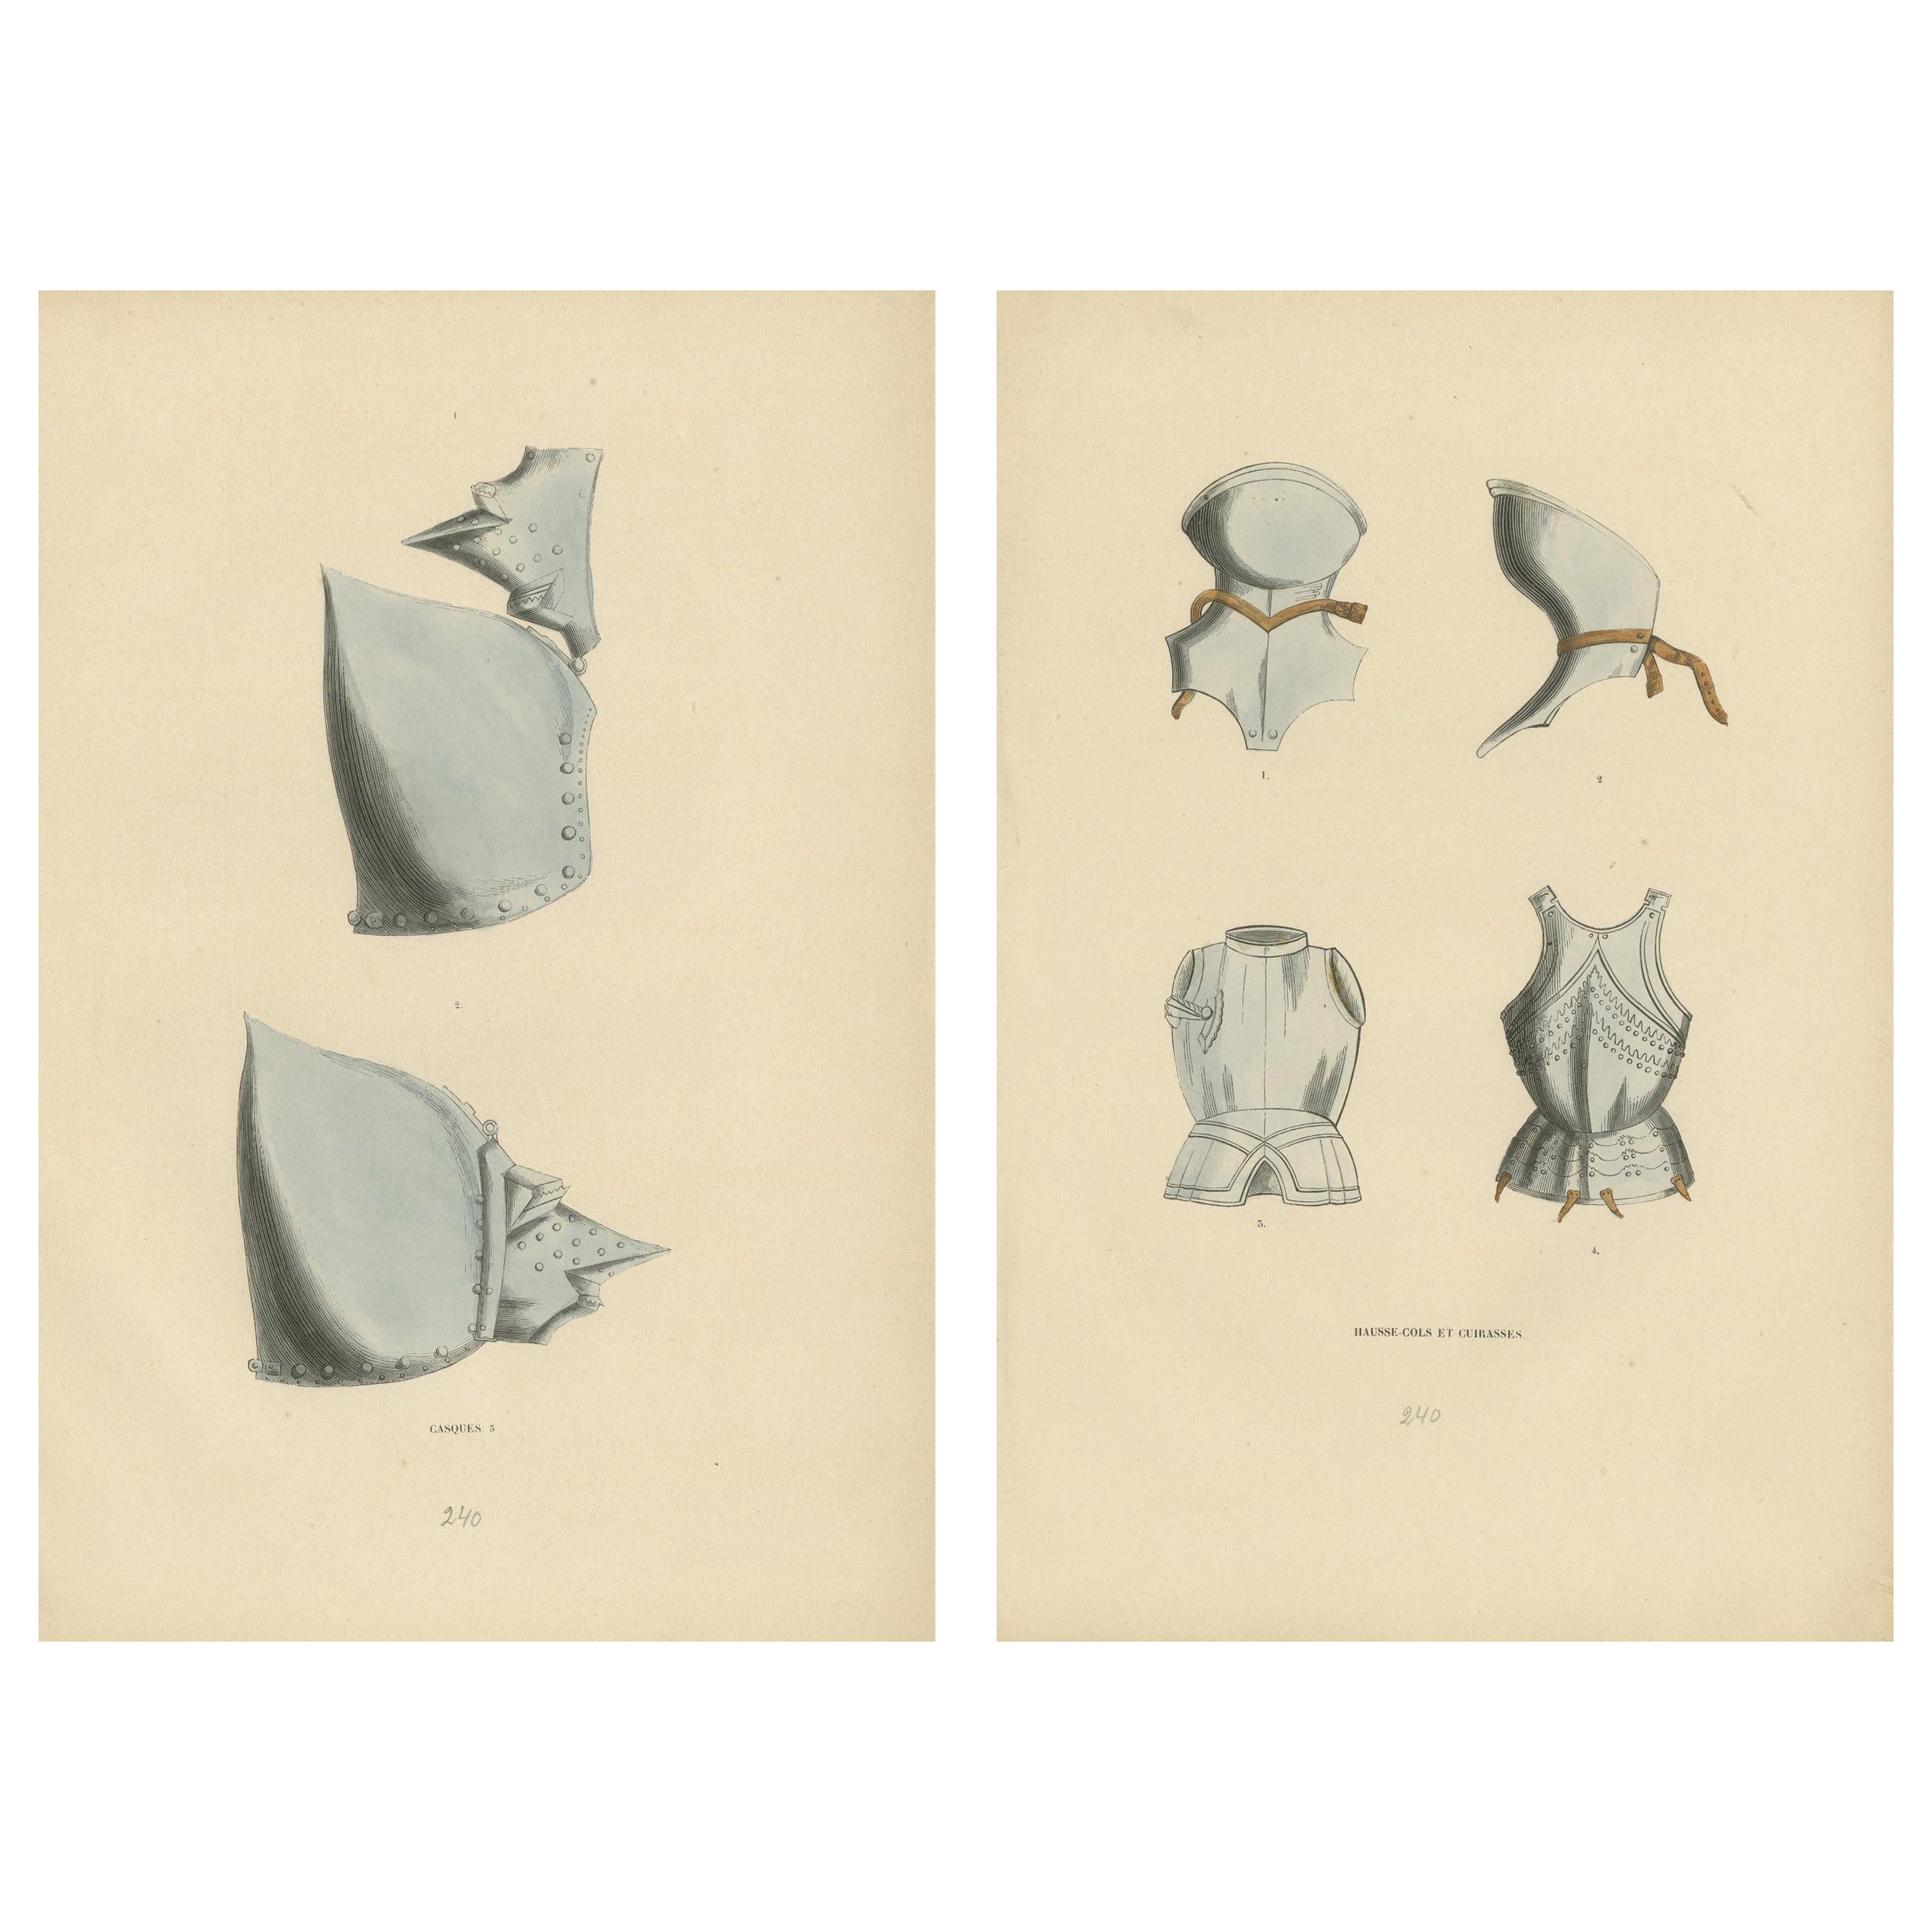 Armaments of Yore: A Study of Medieval Helmets and Armor, 1845